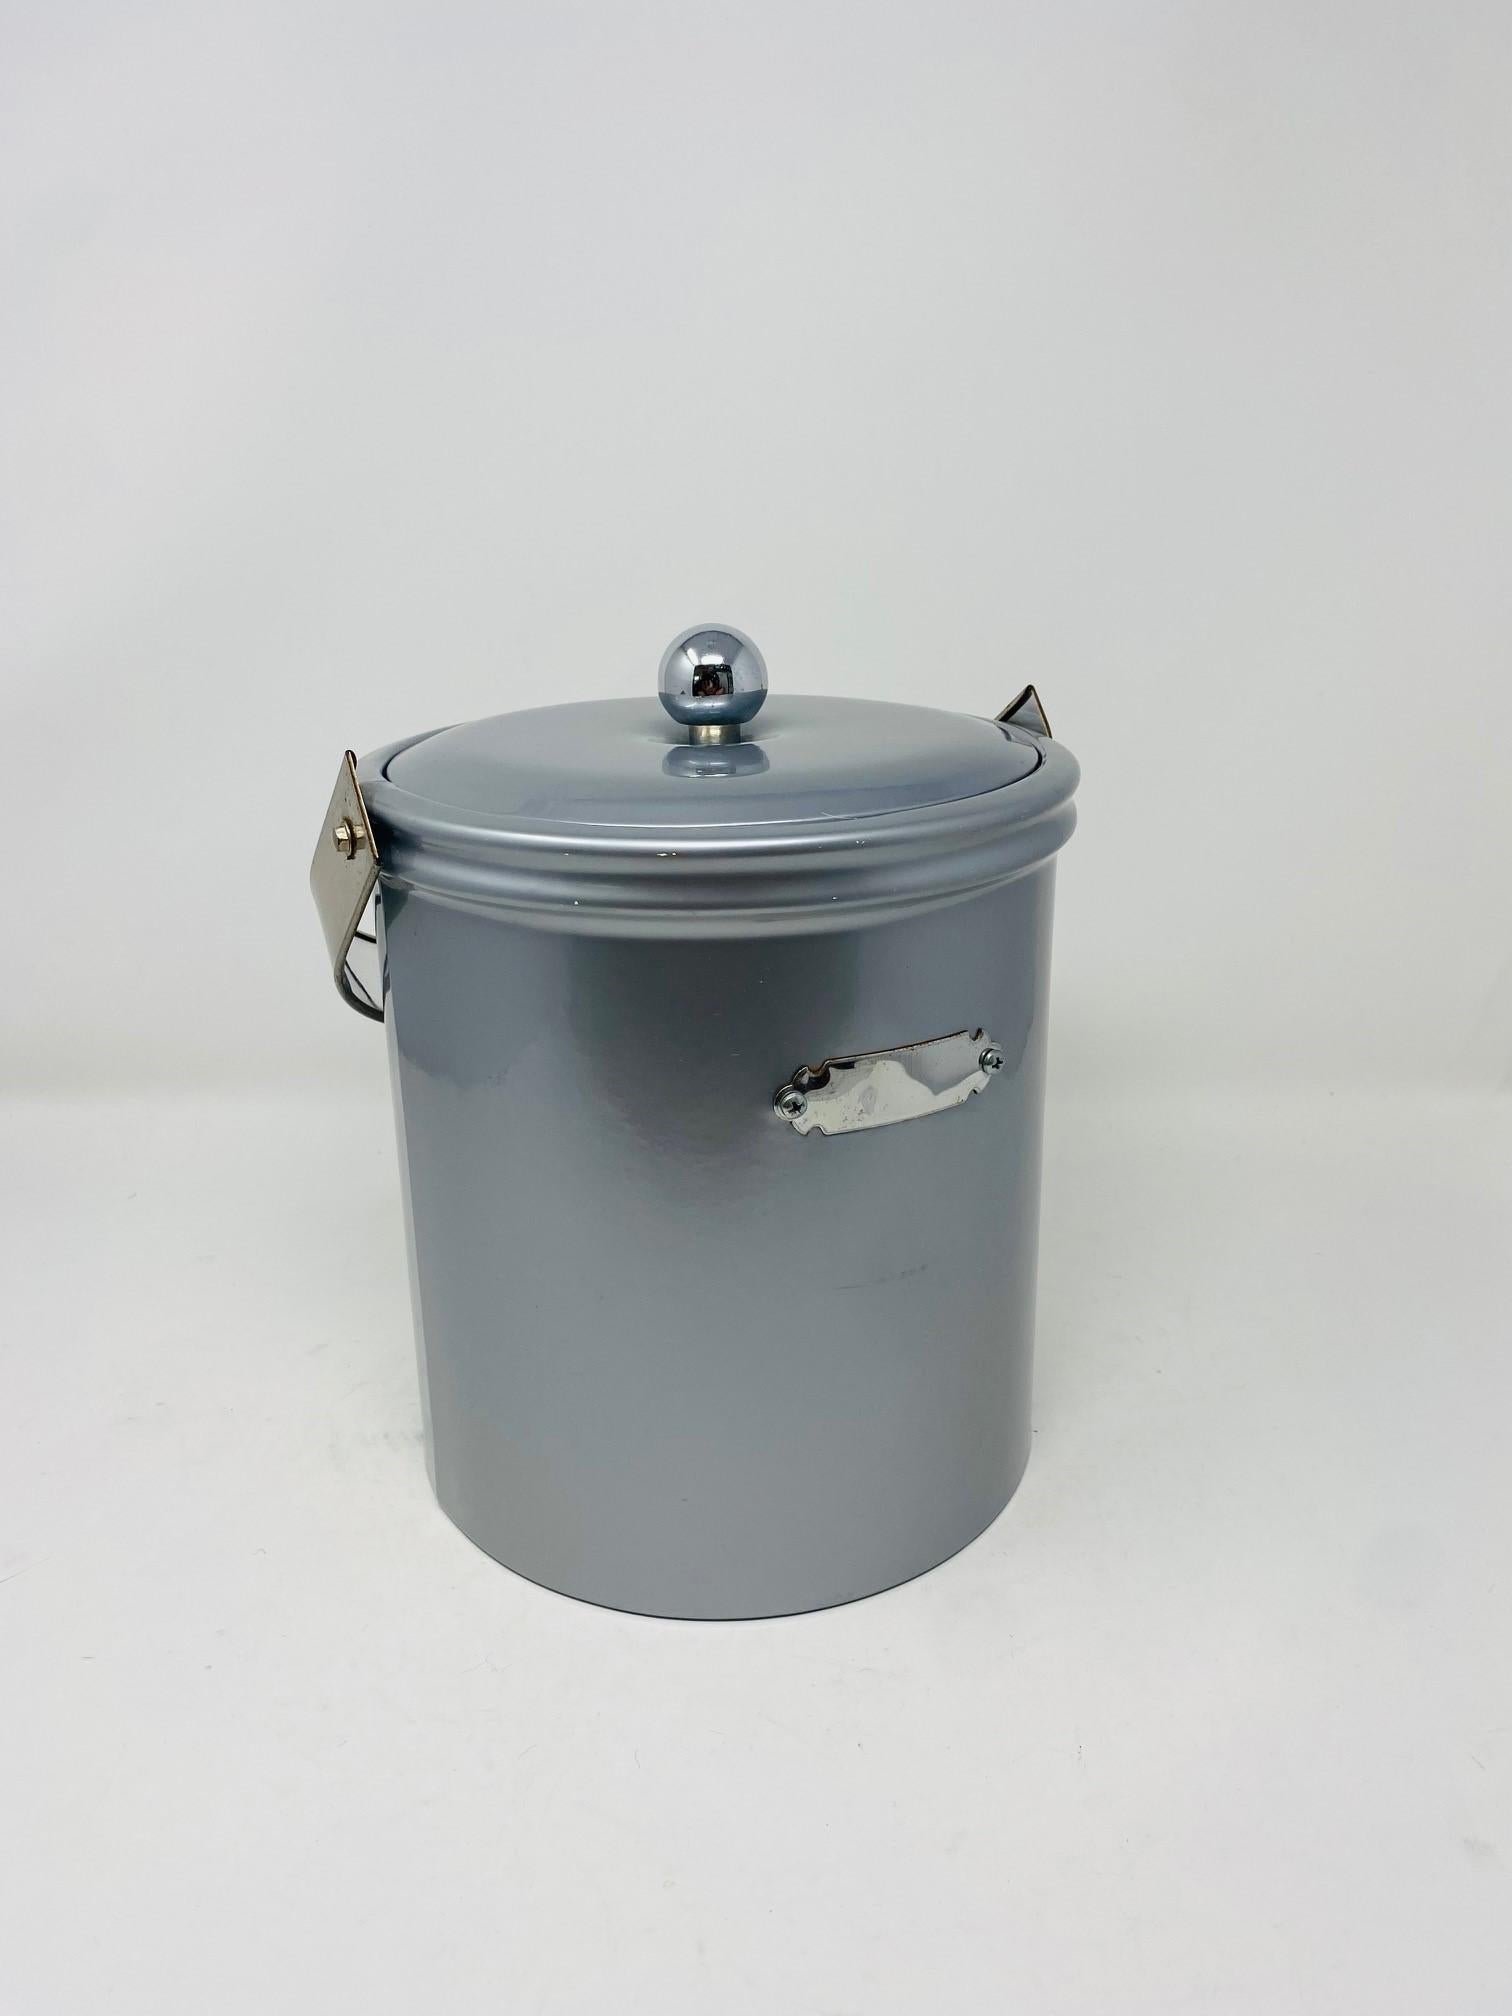 American Vintage Georges Briard 1970s Silver Monochrome Ice Bucket For Sale